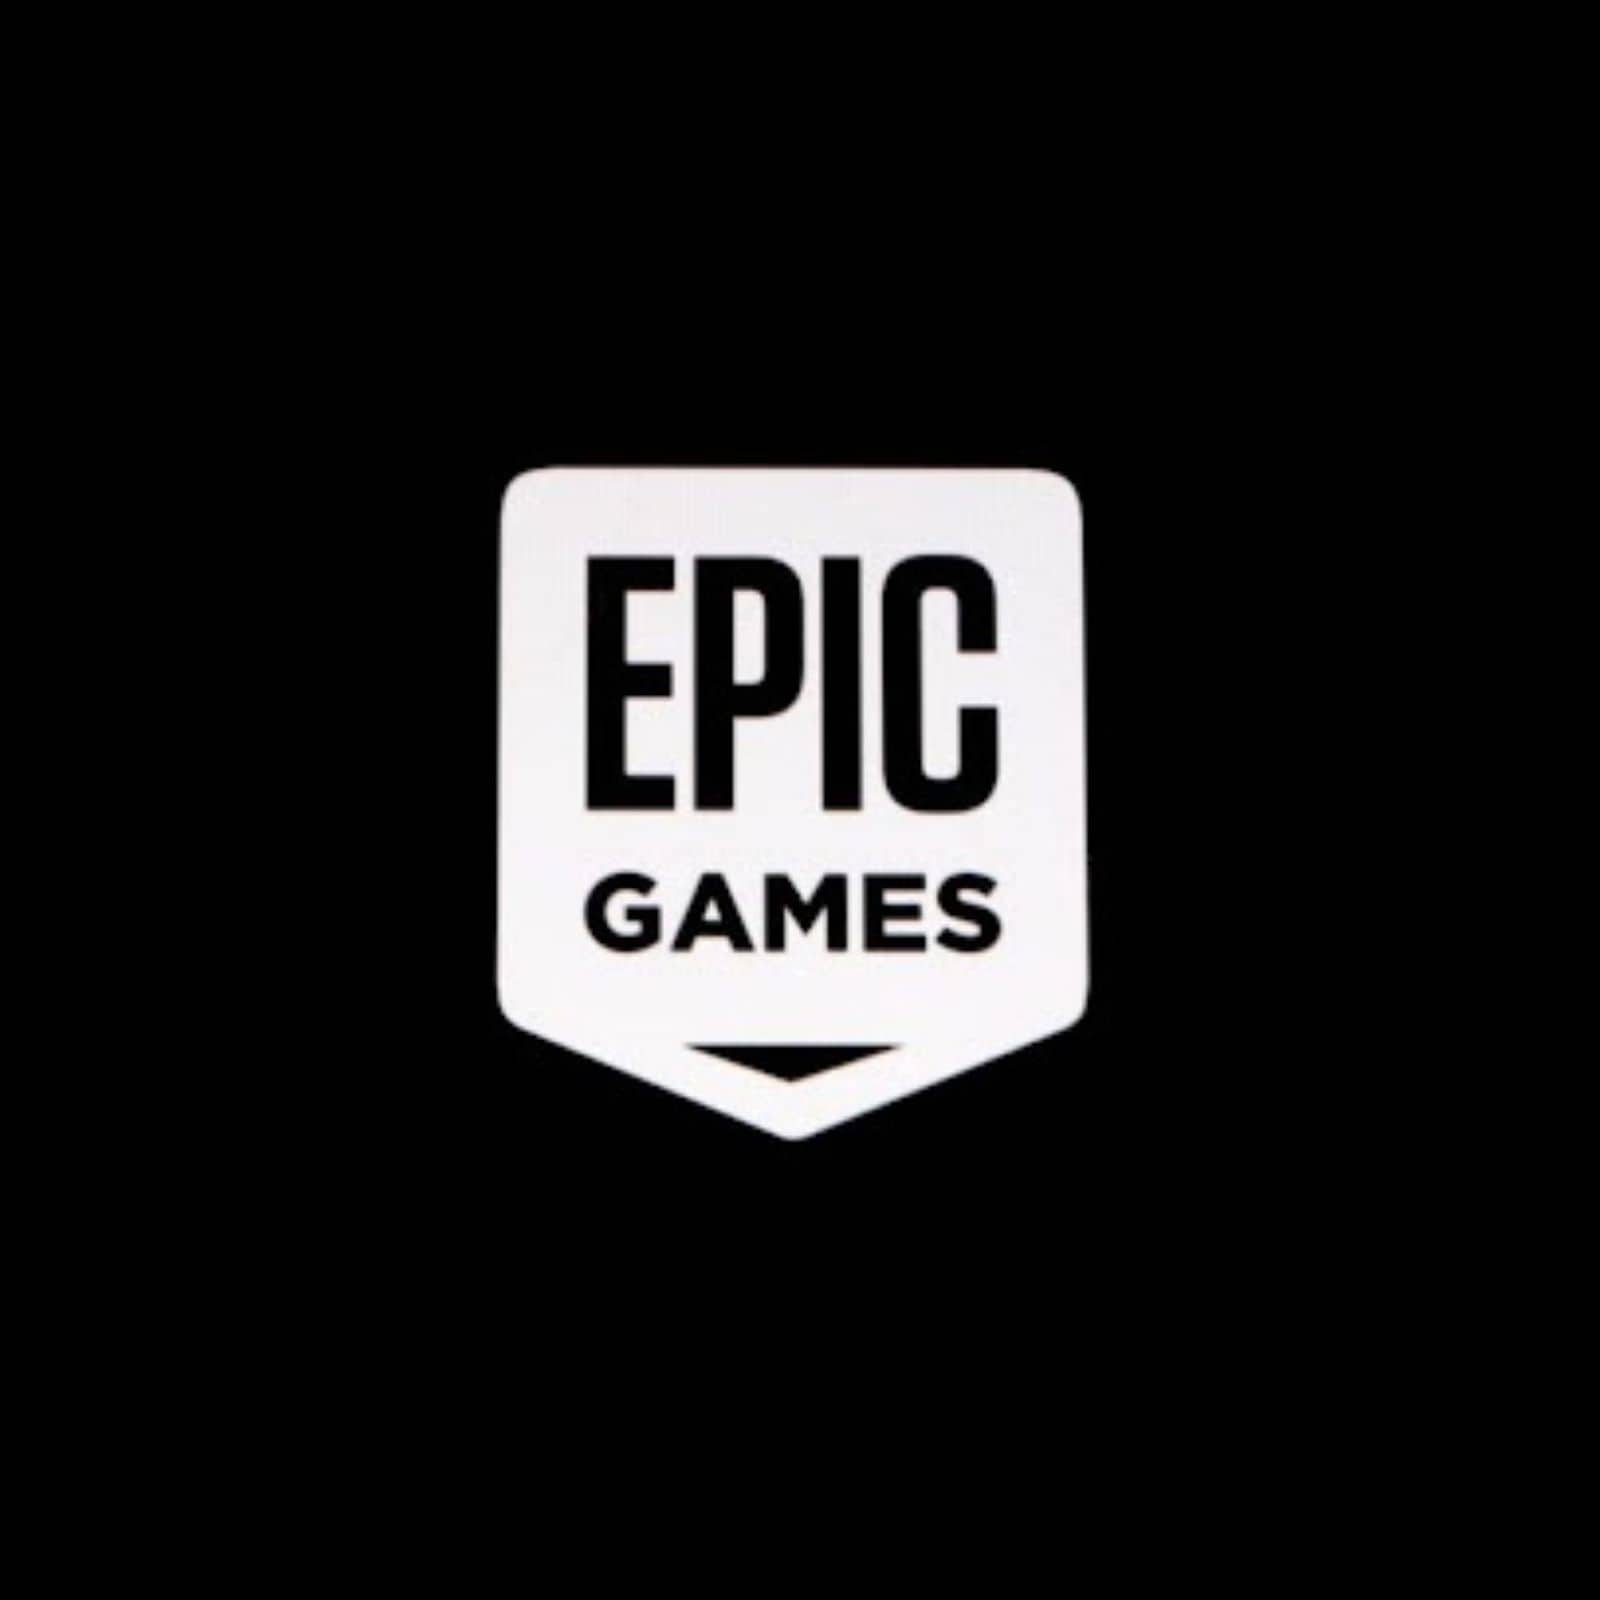 Epic requests for Fortnite to re-enter App Store with its payment systems  in Korea